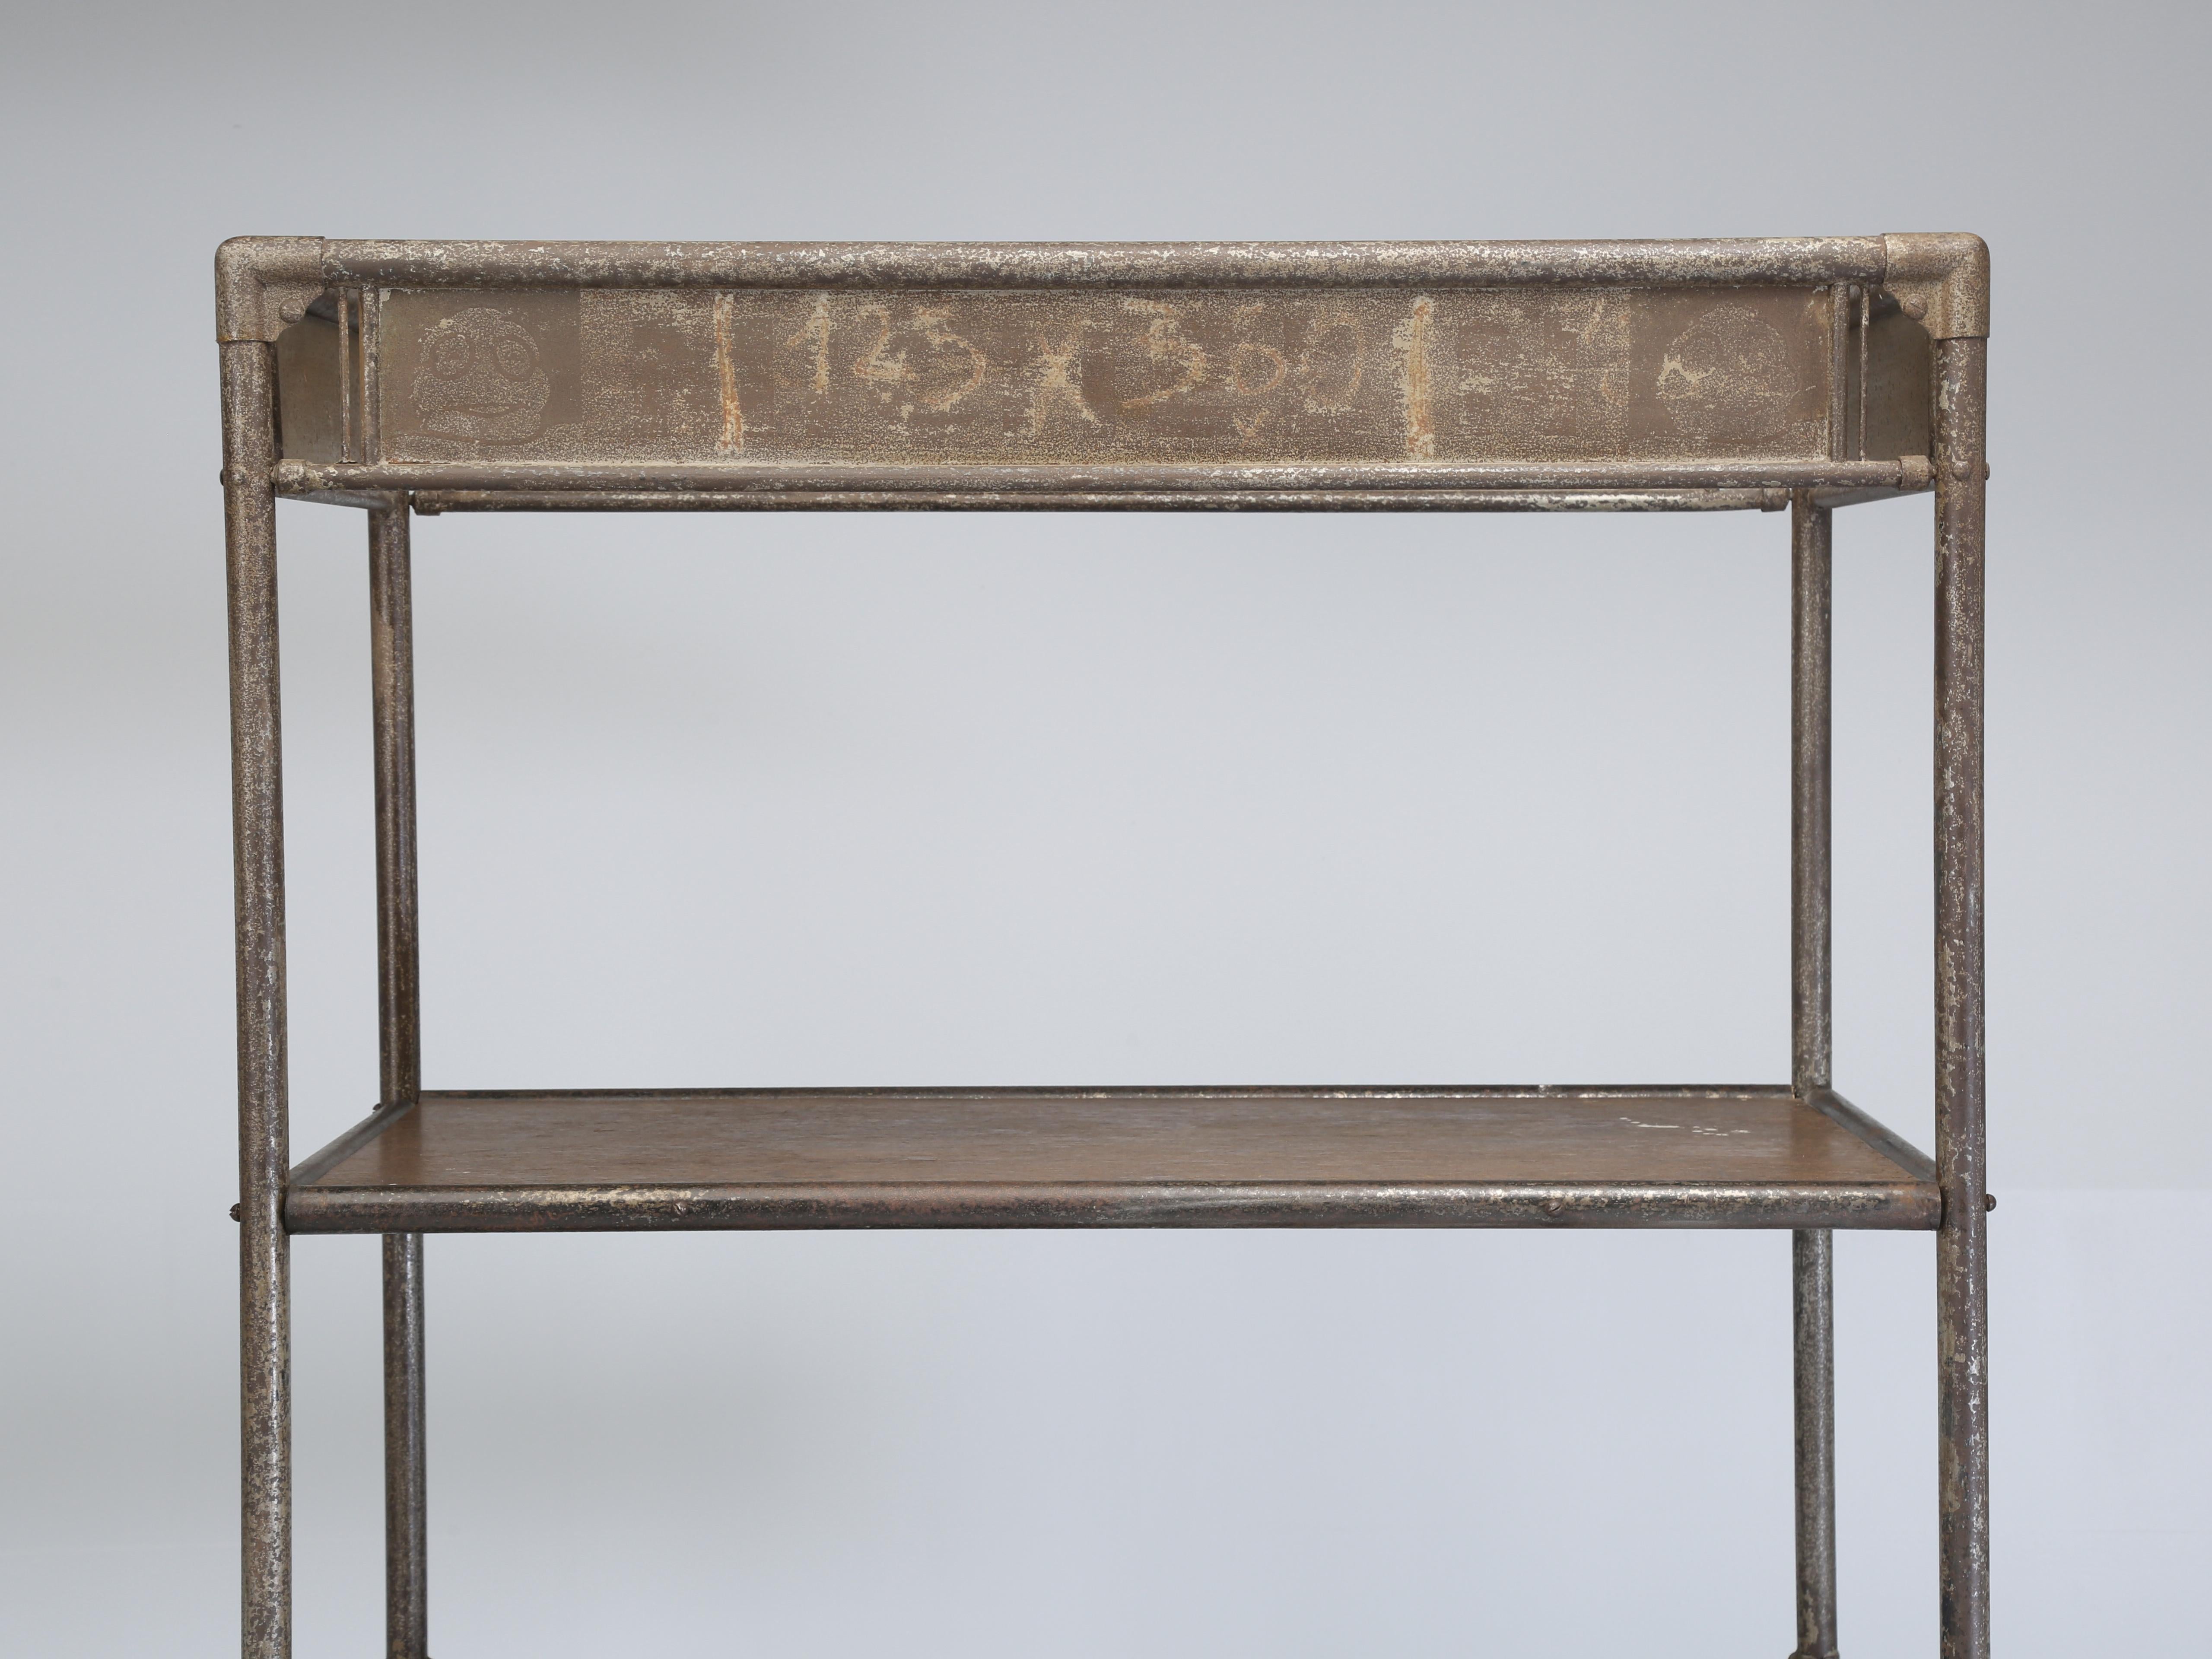 Michelin Antique French Industrial Steel Shelf Unit Made in France c1900-1920 For Sale 8